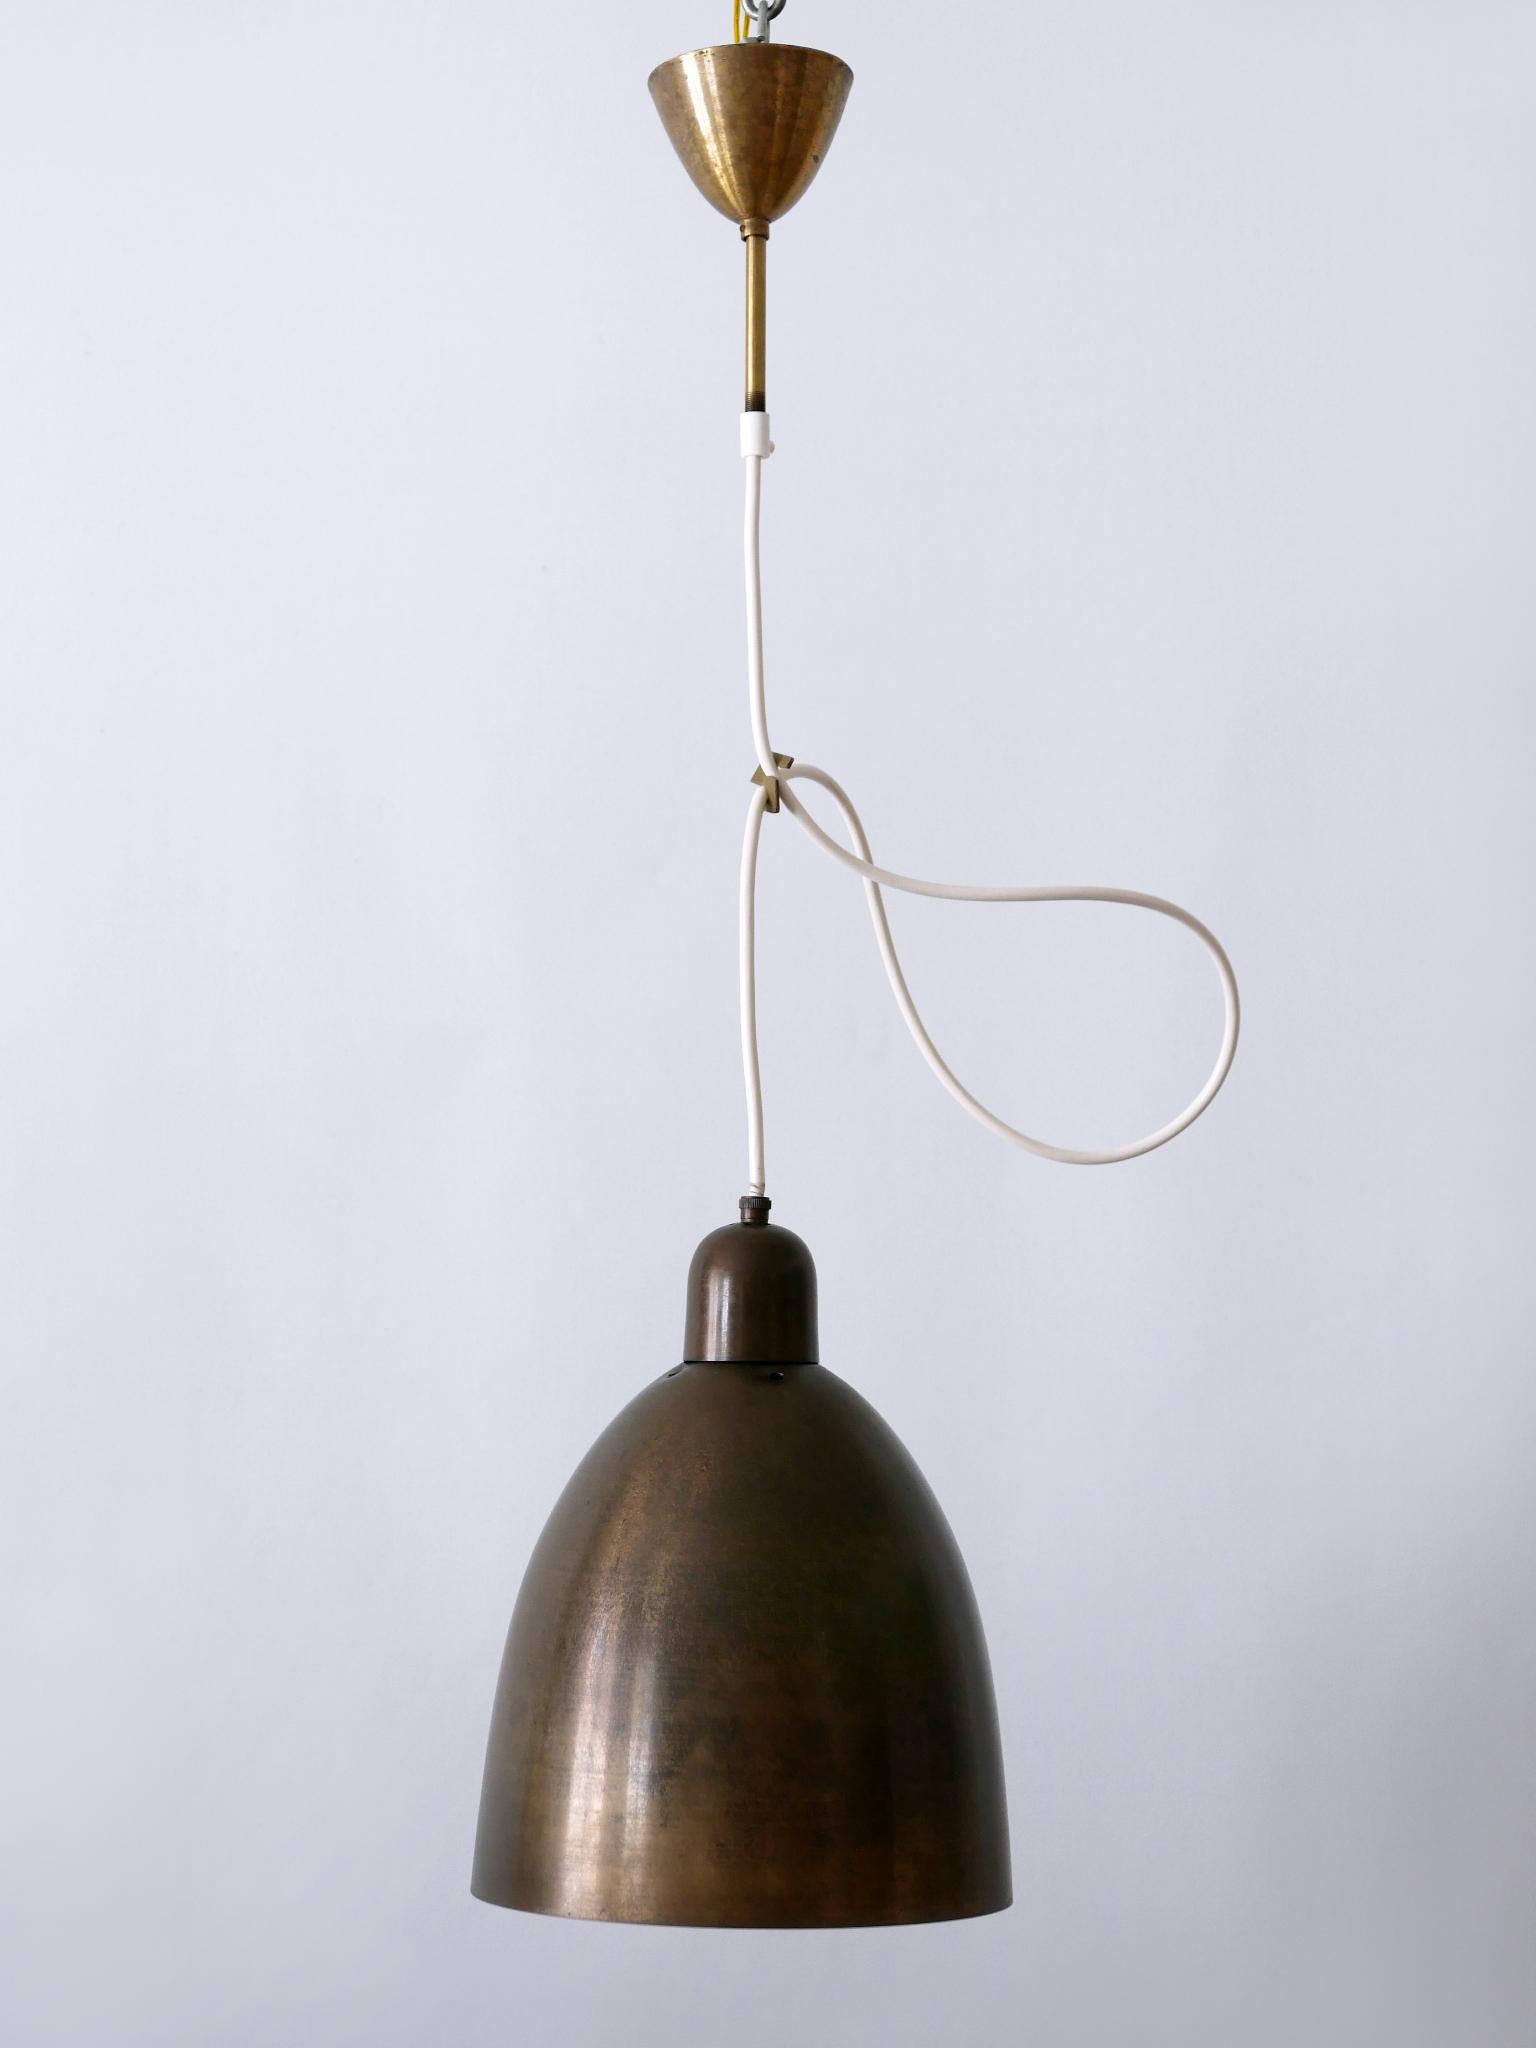 Rare, elegant and highly decorative Mid-Century Modern solid brass pendants lamp or hanging lights. They had been in use in a German church. Designed & manufactured in Germany, 1950s.

A total of seven identical lamps are available. Price per